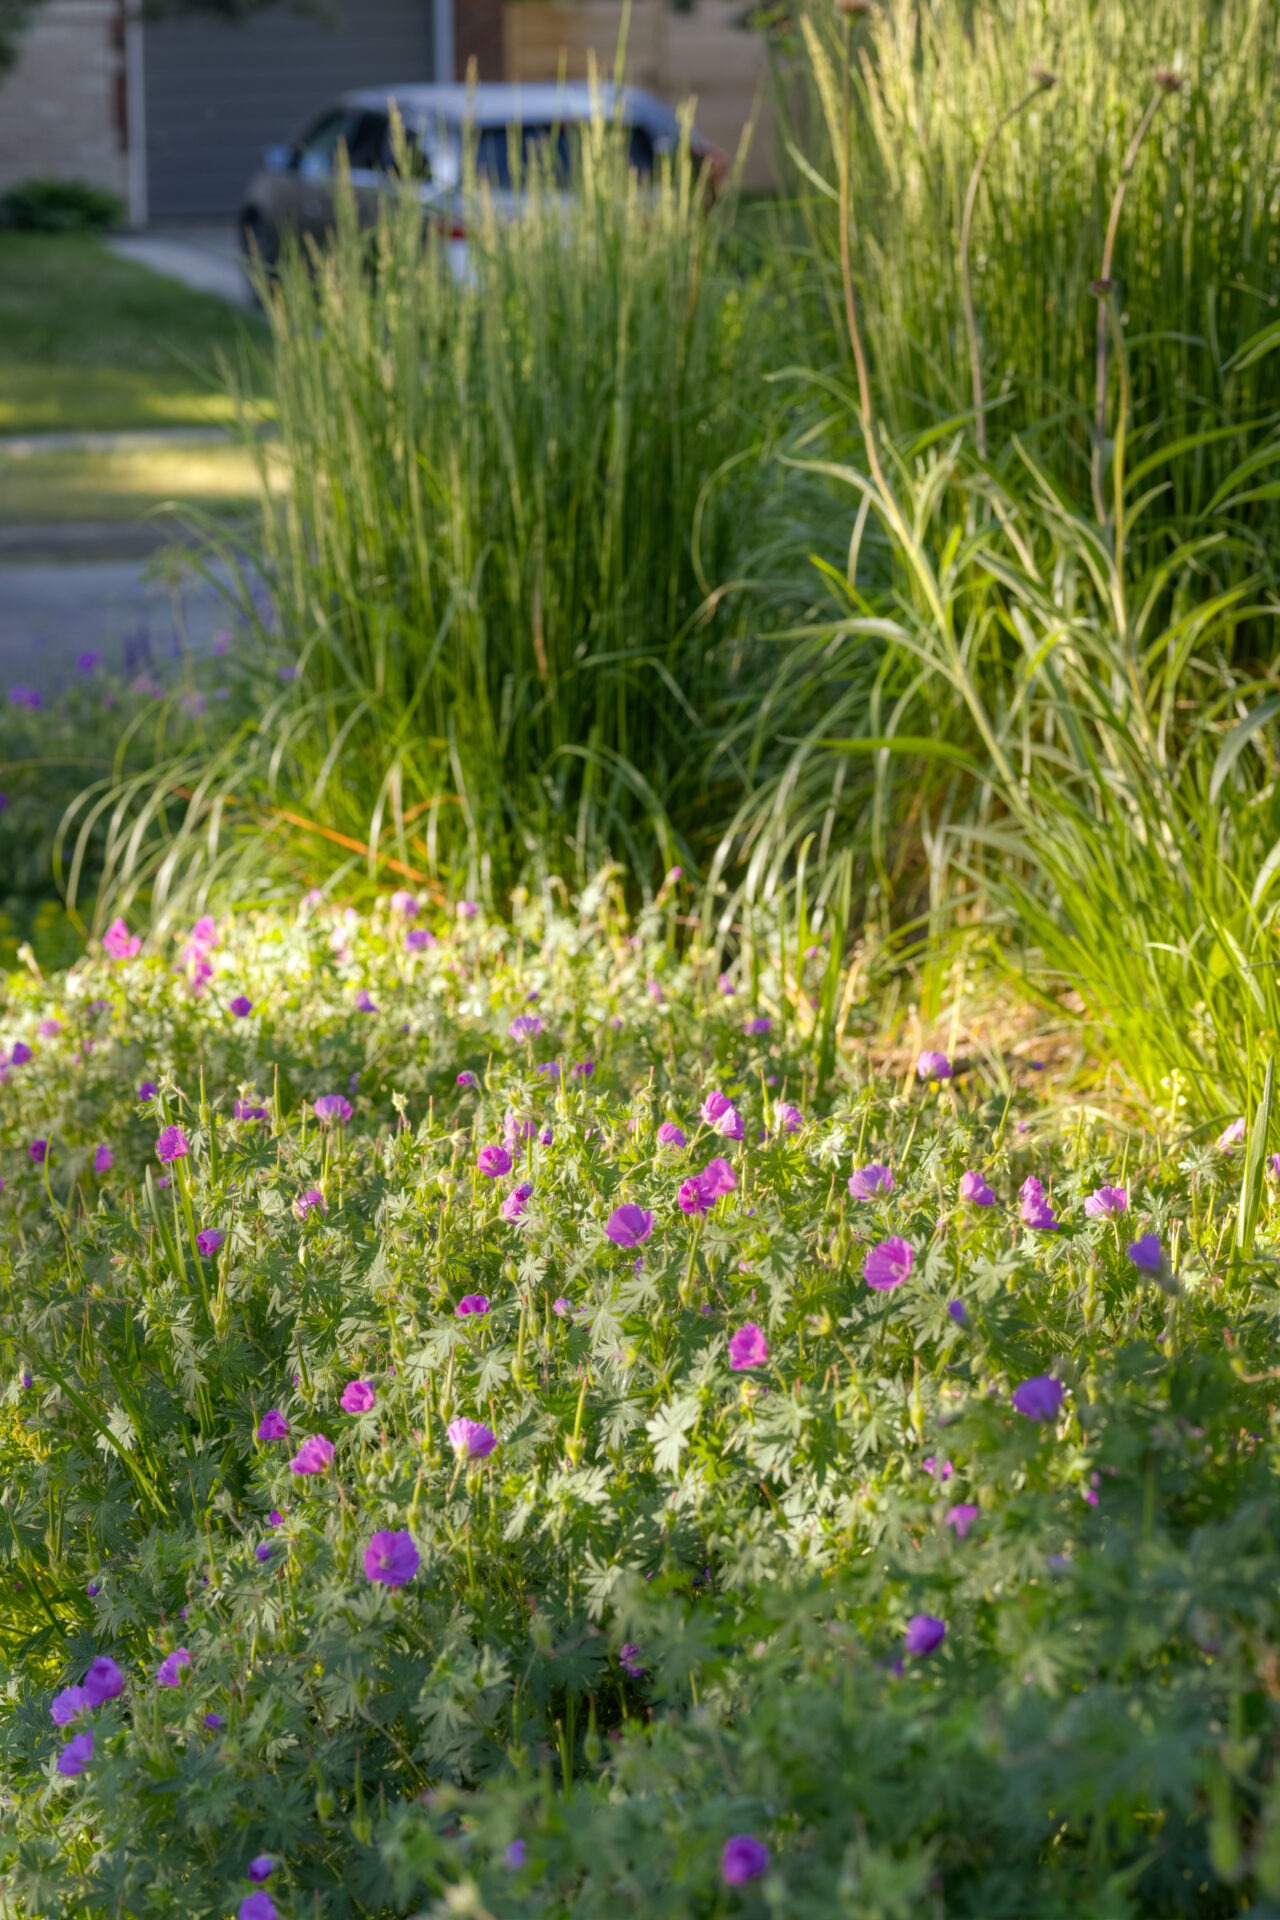 A garden with blooming purple flowers in the foreground, surrounded by lush greenery, with a blurred background hinting at a residential area.